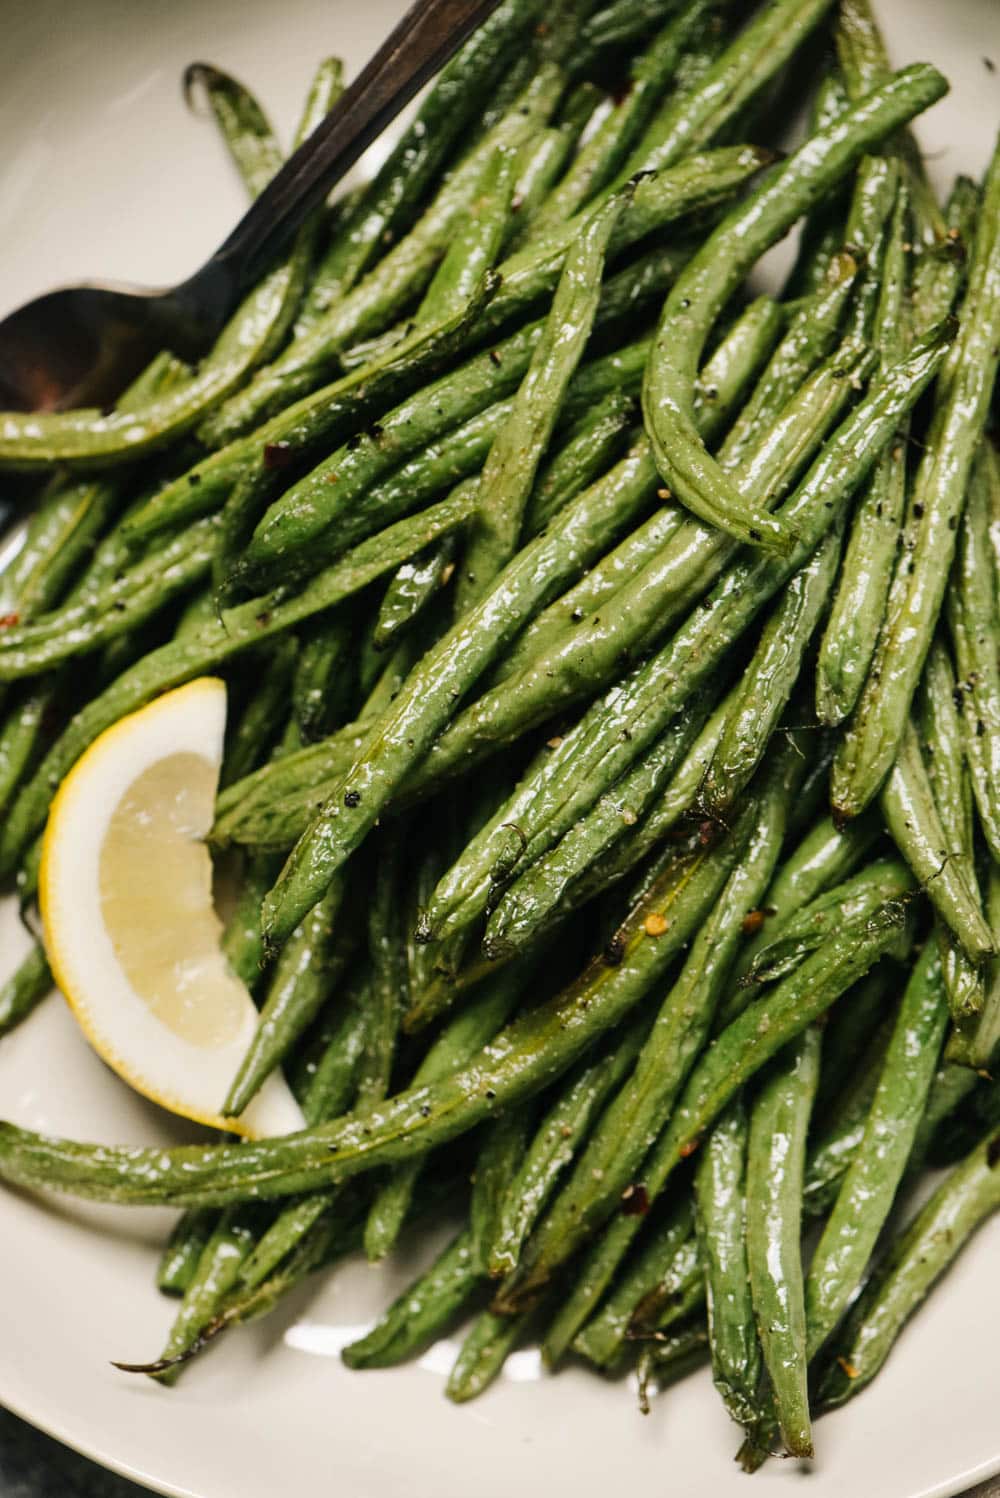 Air fryer green beans in a tan serving dish with lemon wedges and a vintage serving fork.